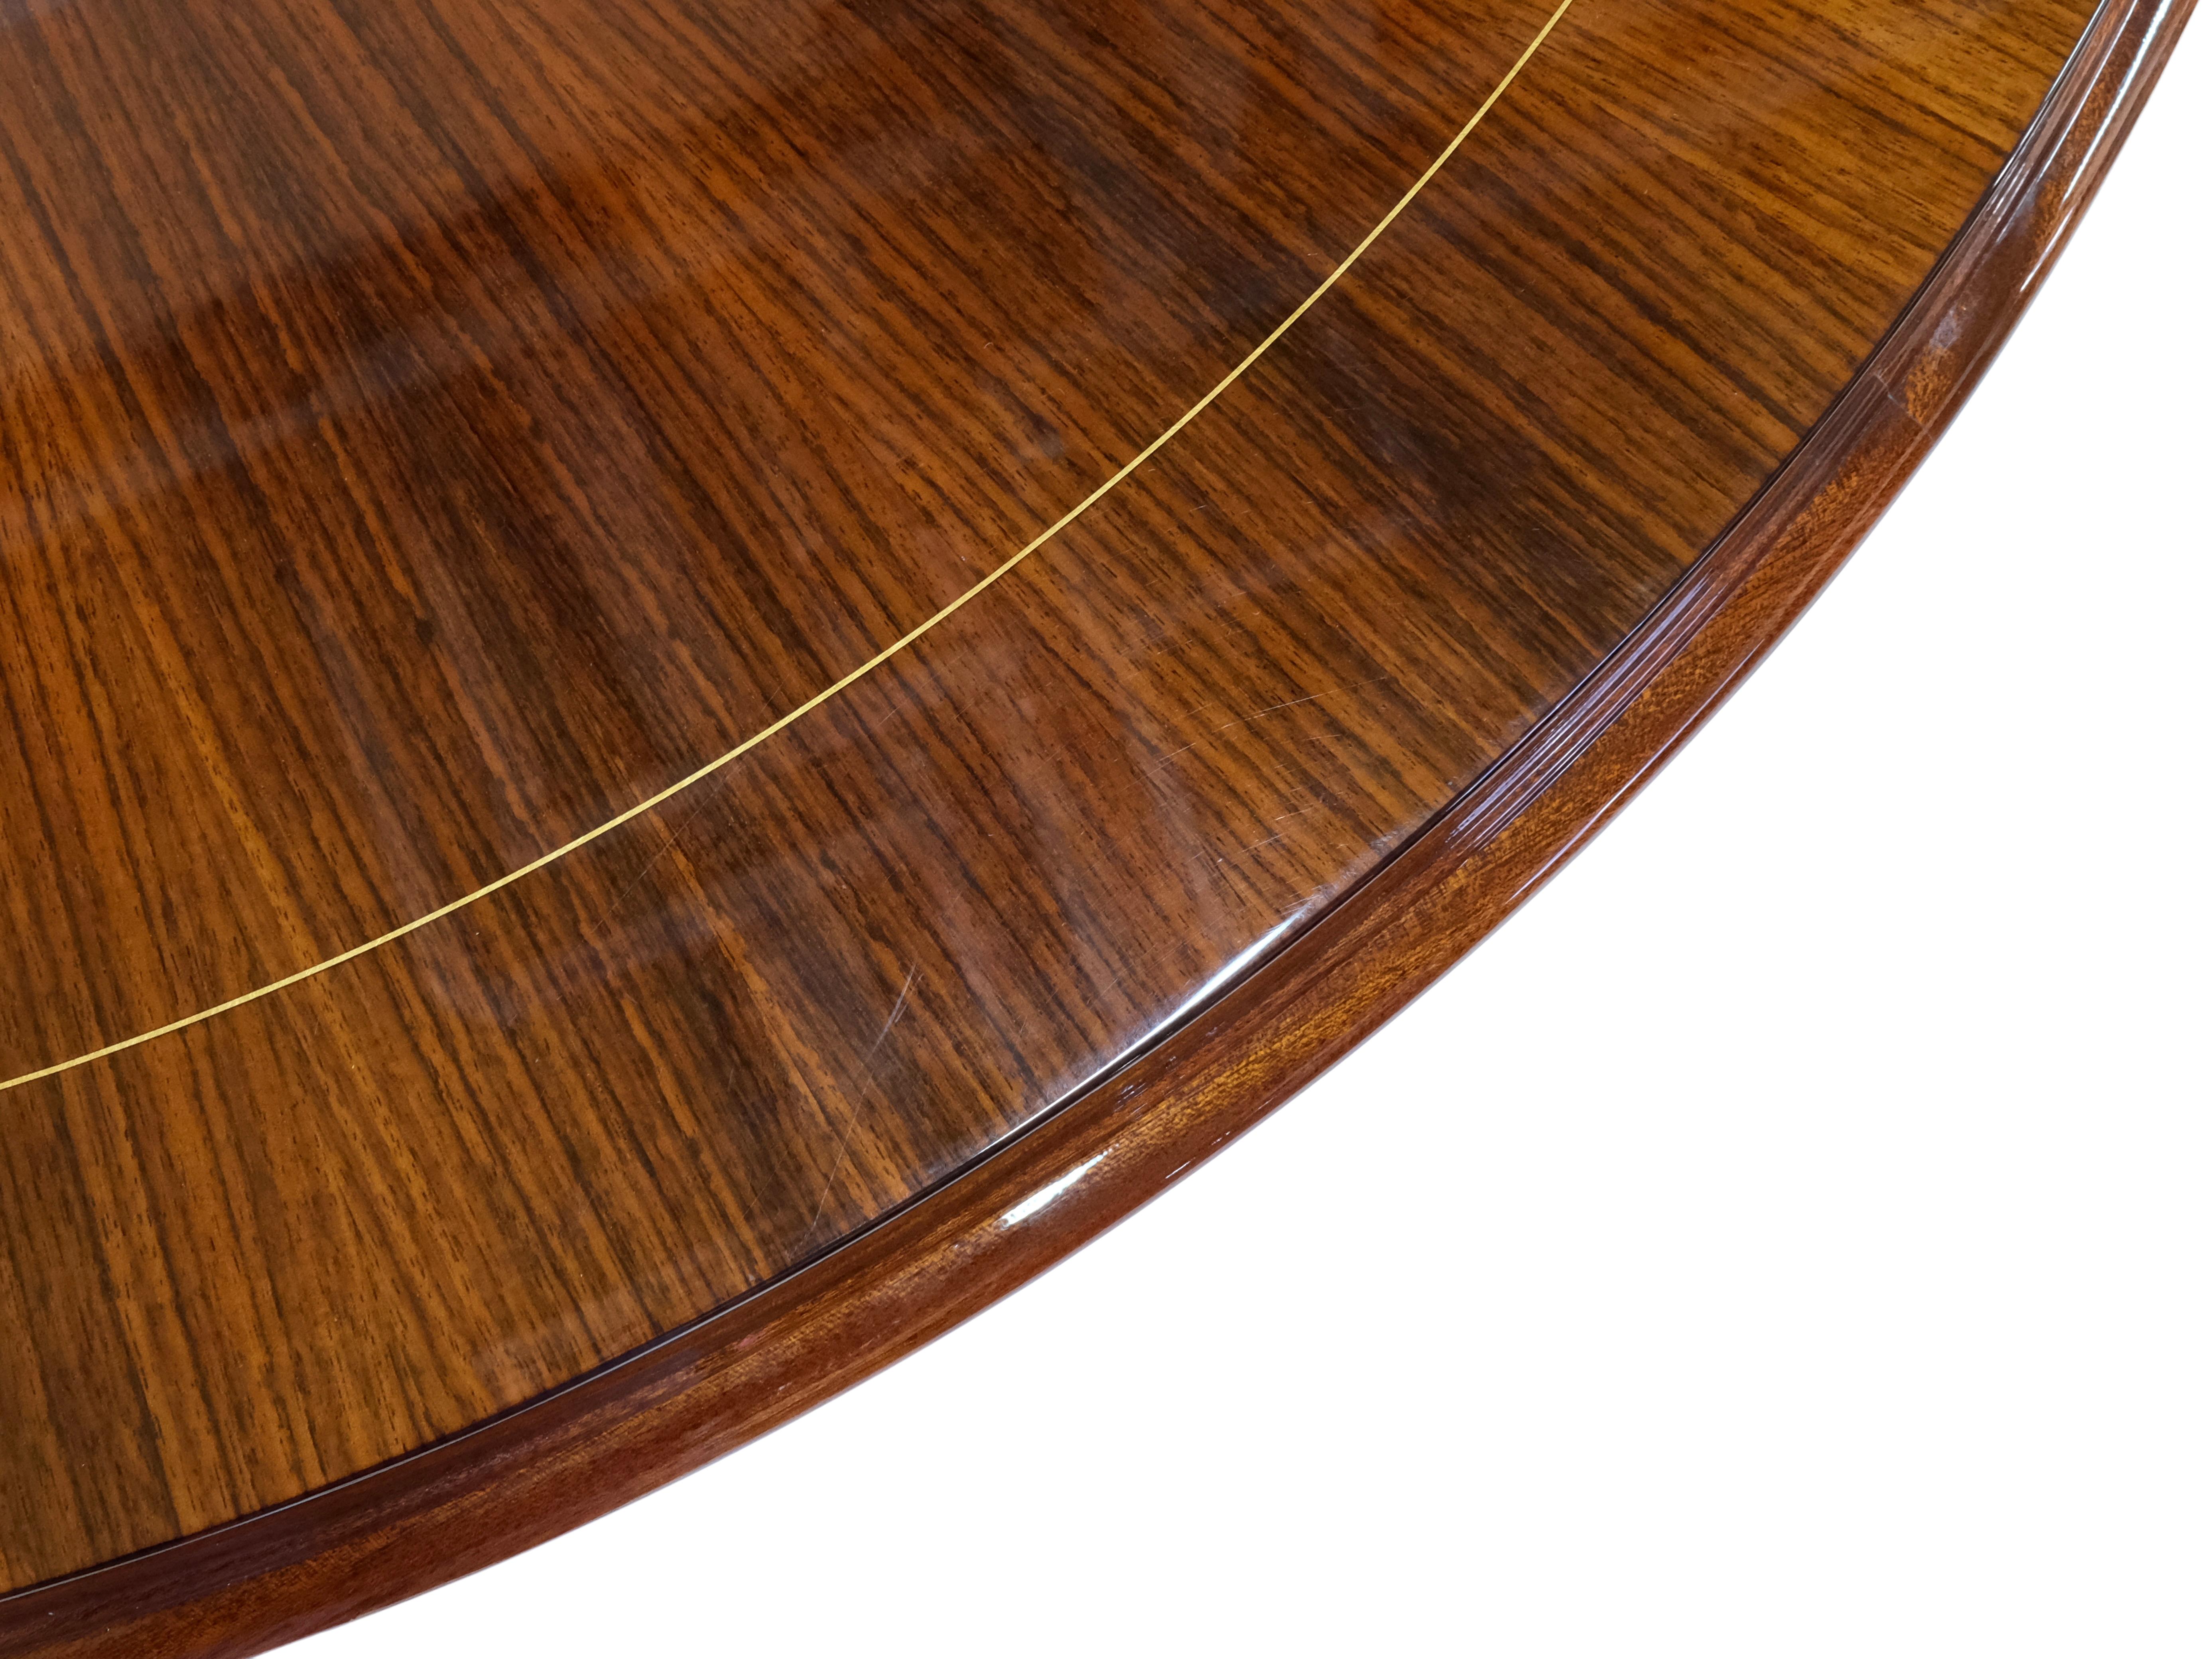 Polished 1930s Round Art Deco Dining or Center Table in Mahogany with Brass Fittings